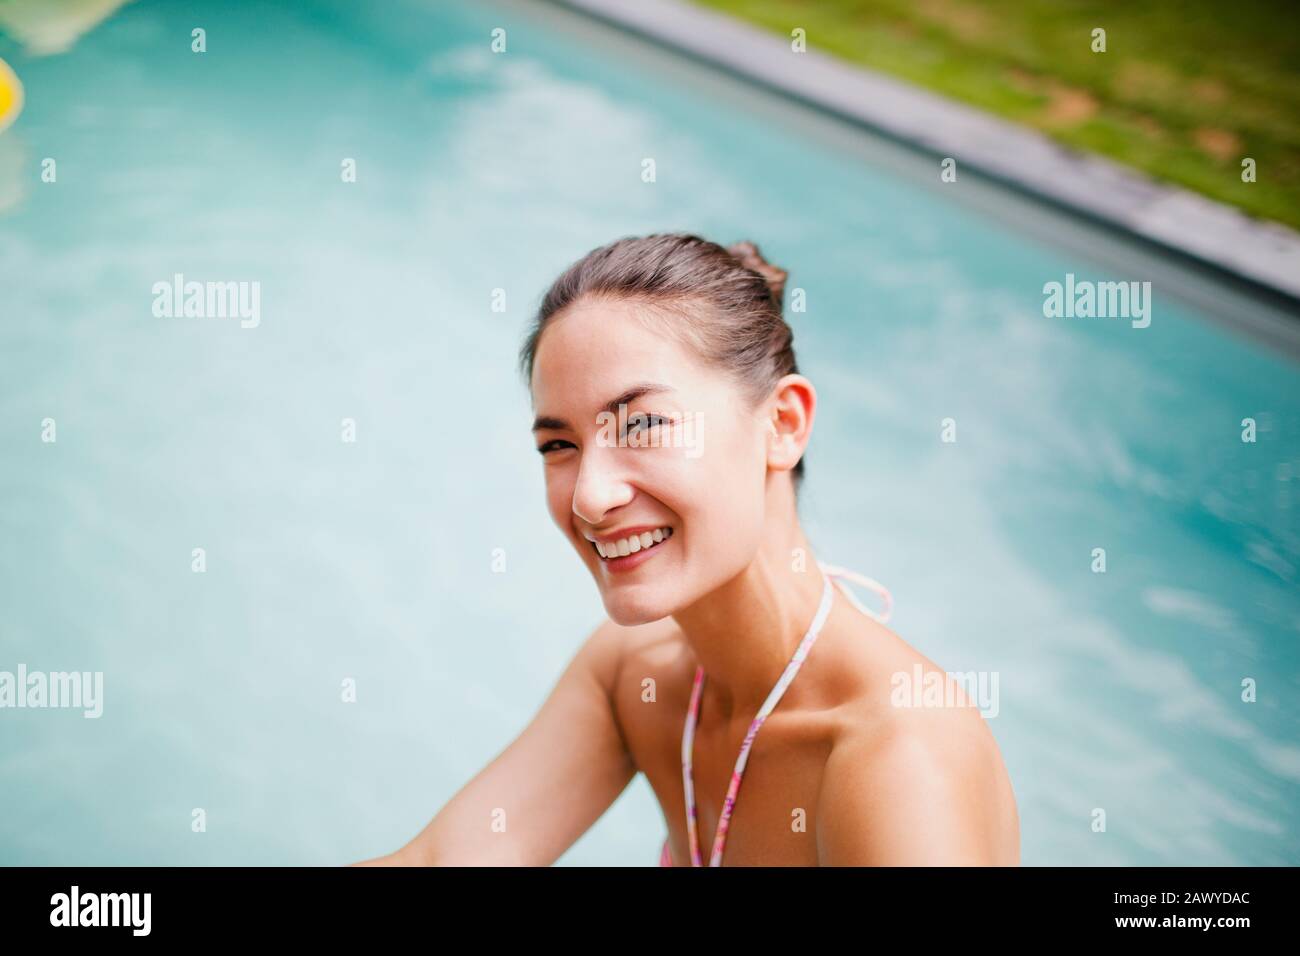 Portrait happy, laughing woman at swimming pool Stock Photo